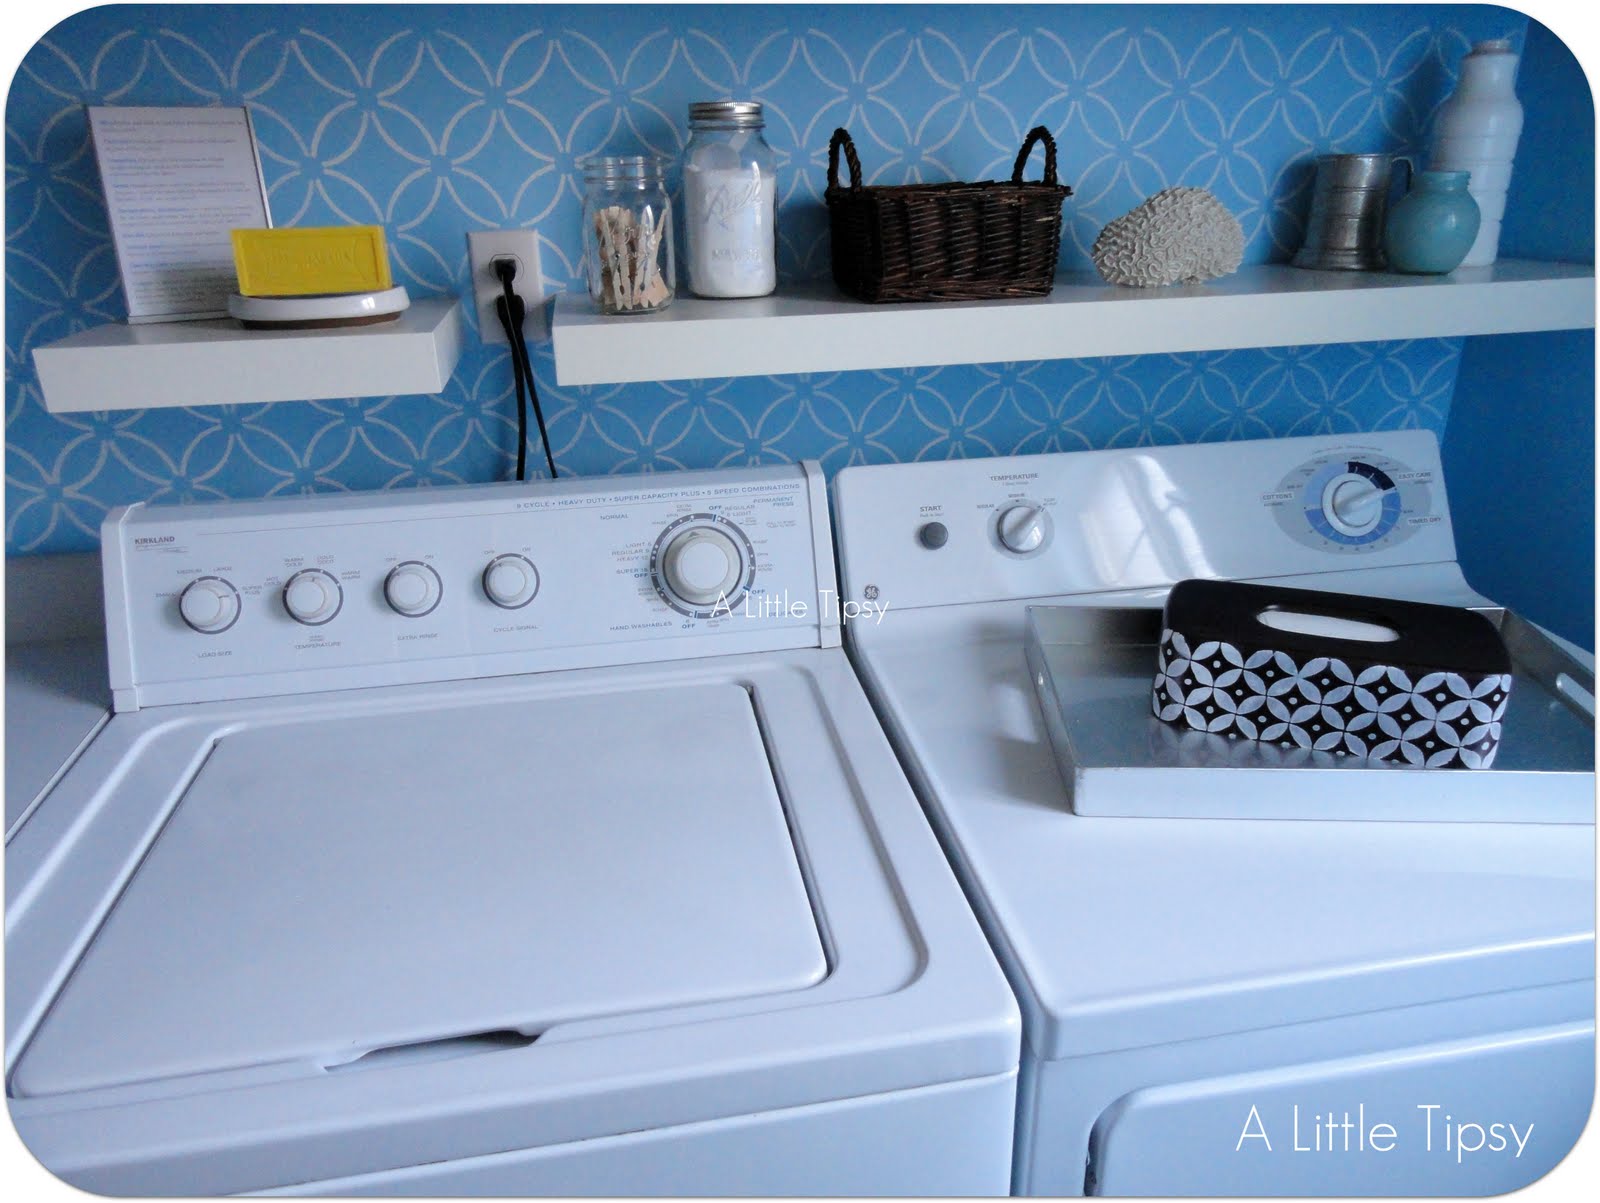 Laundry Room: Three Projects Under $5 - A Little Tipsy